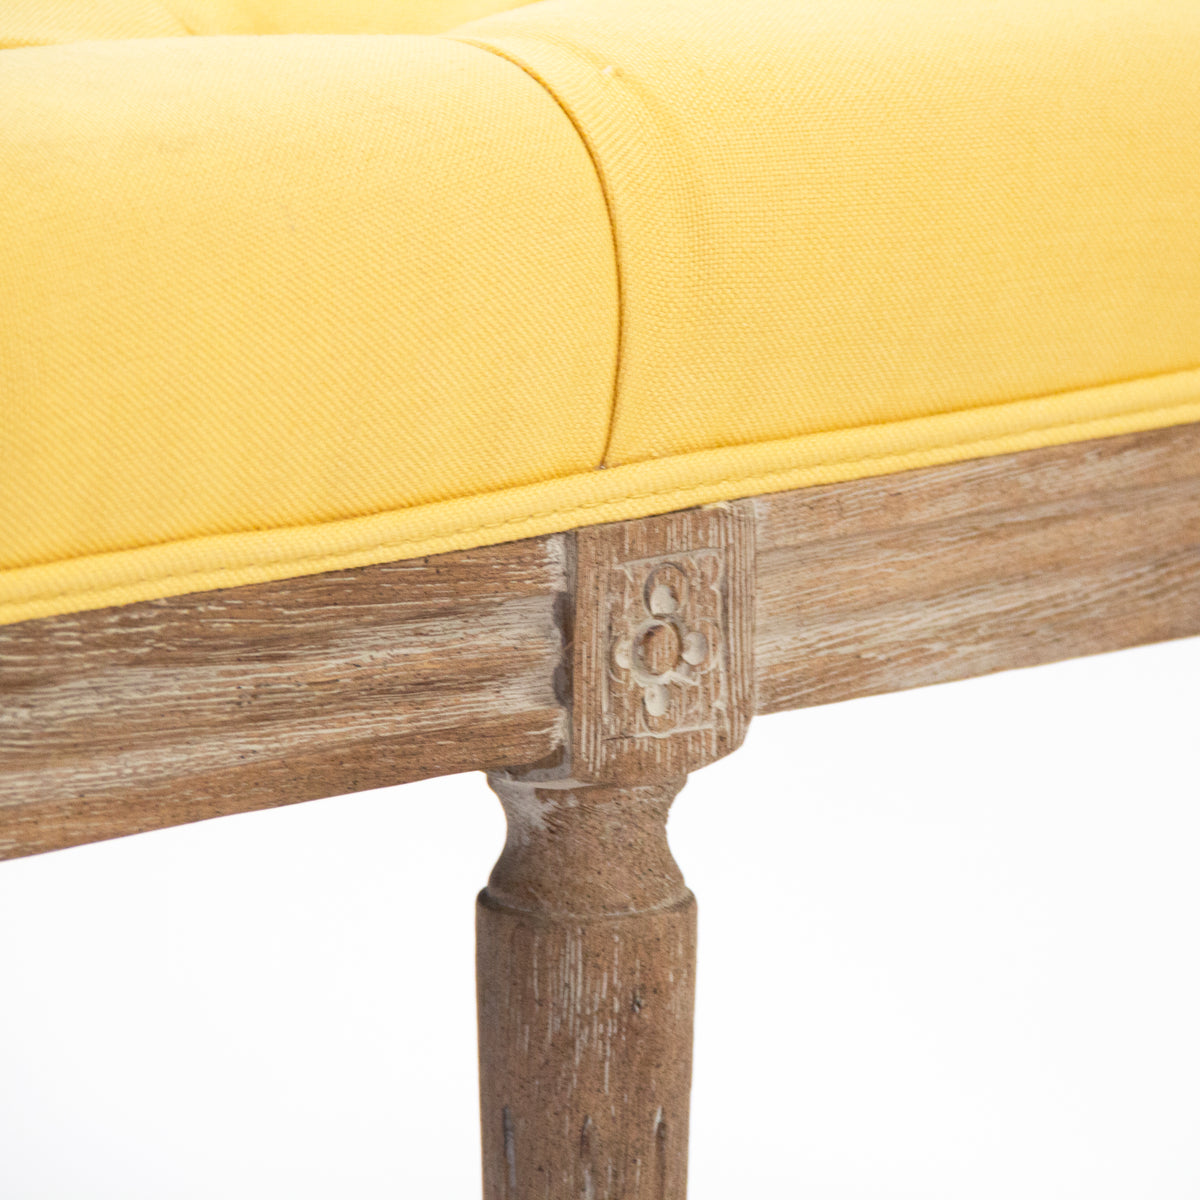 Louis Tufted Bench by Zentique